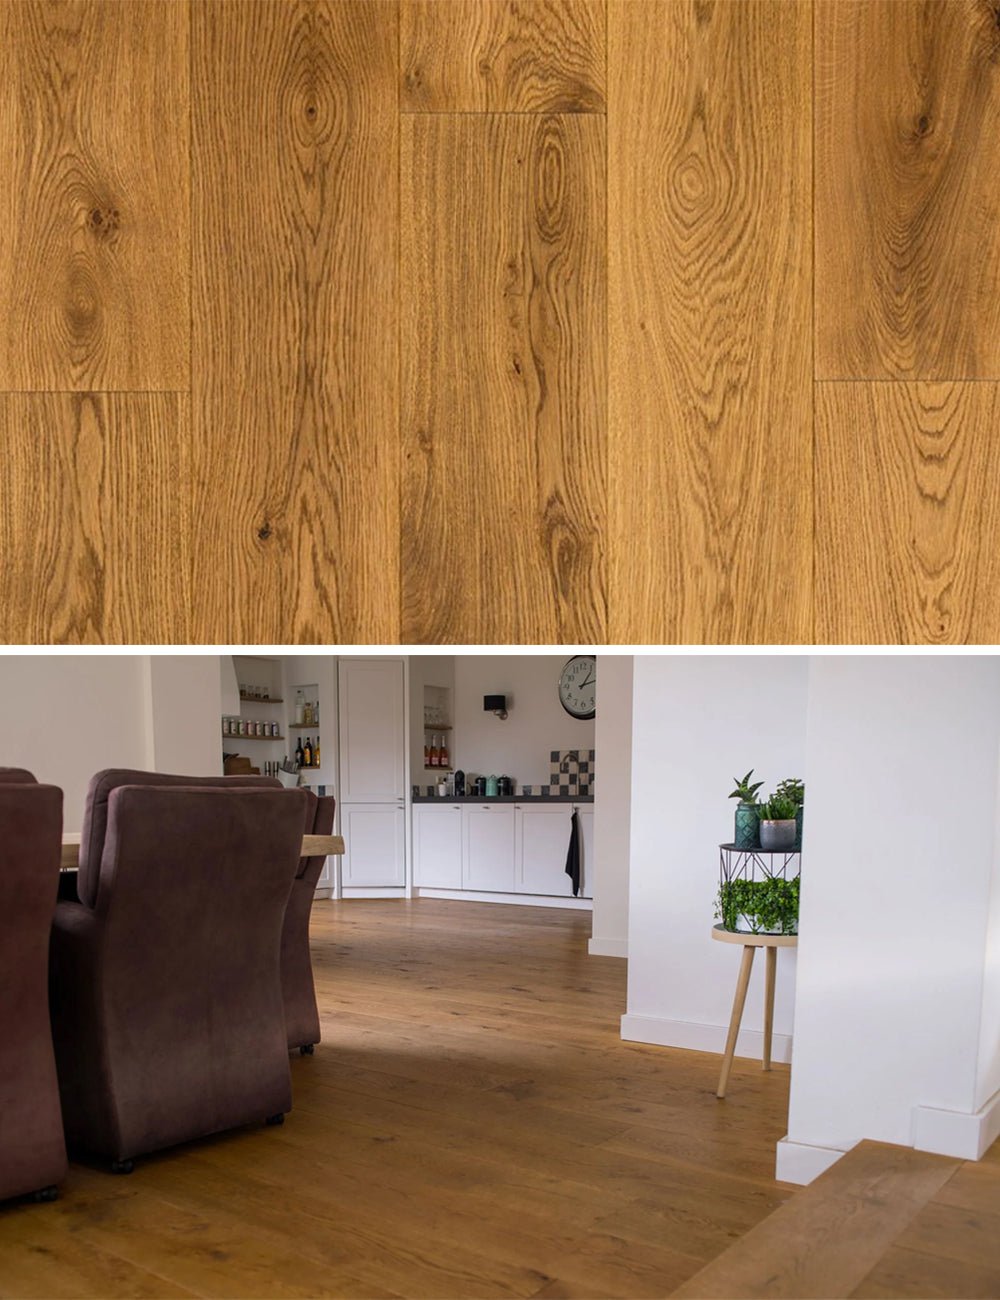 Floer Lamelparket Chêne Rustique Multiplank Single Smoked &amp; Oiled - Parquet - Solza.nl